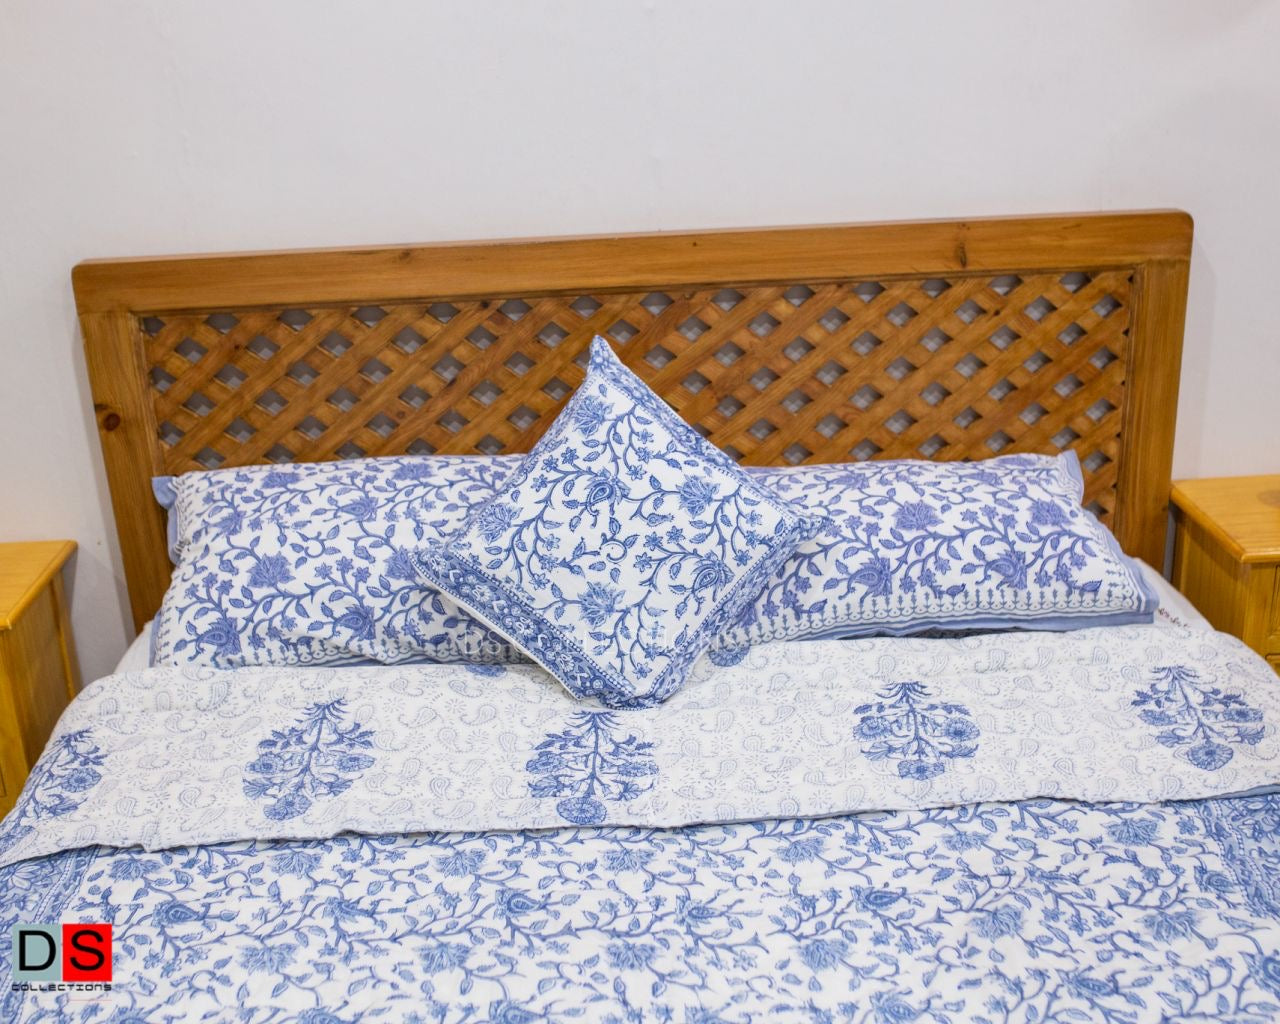 Hand Block Printed Cotton Bed Sheet "King Size"